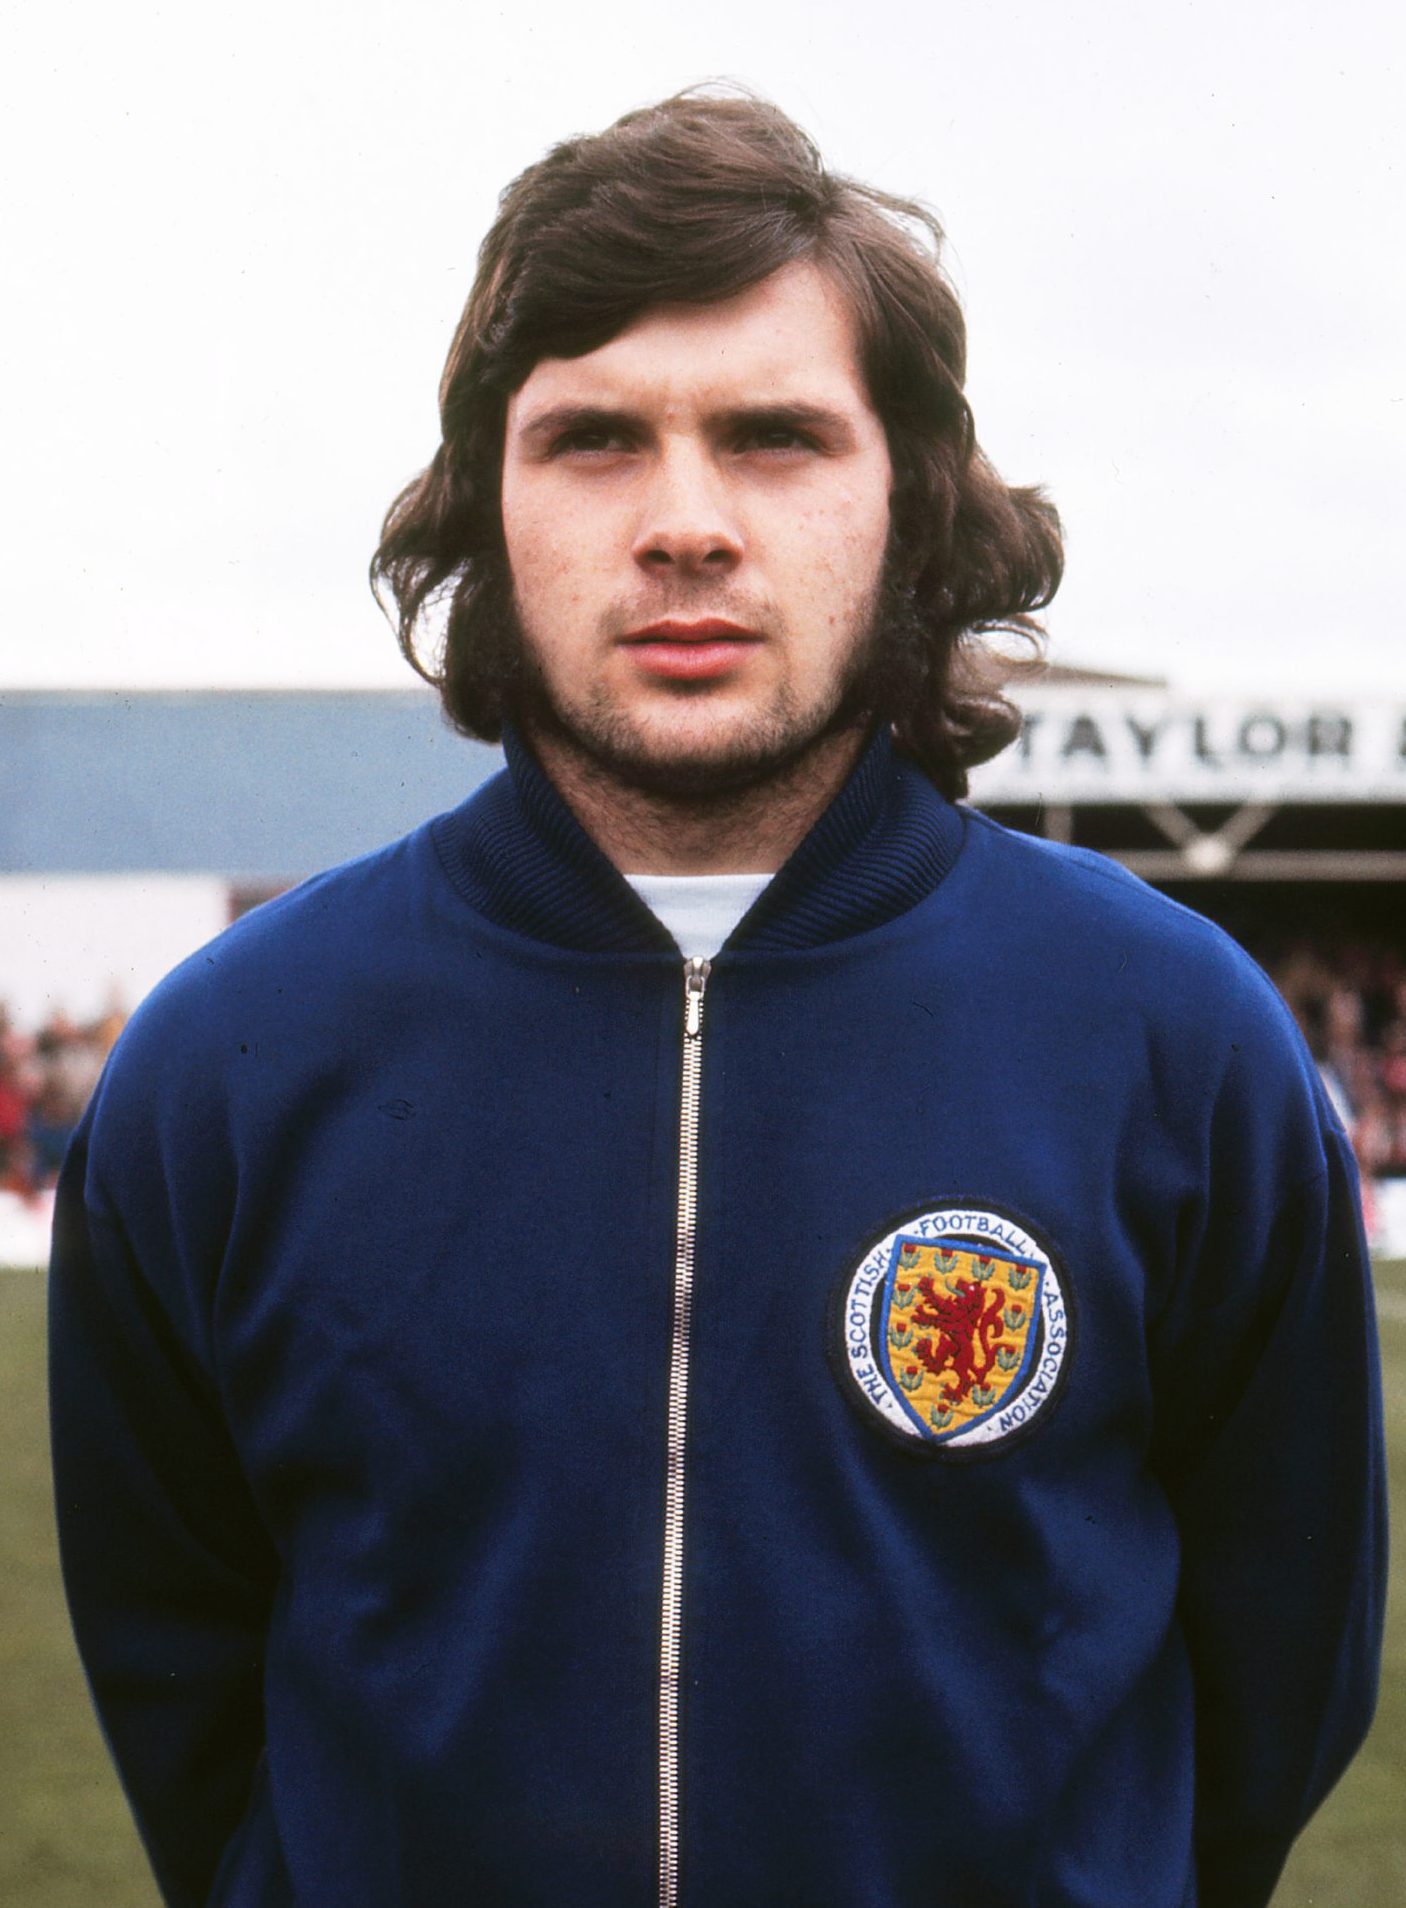 Derek Johnstone in his Scotland tracksuit before a game